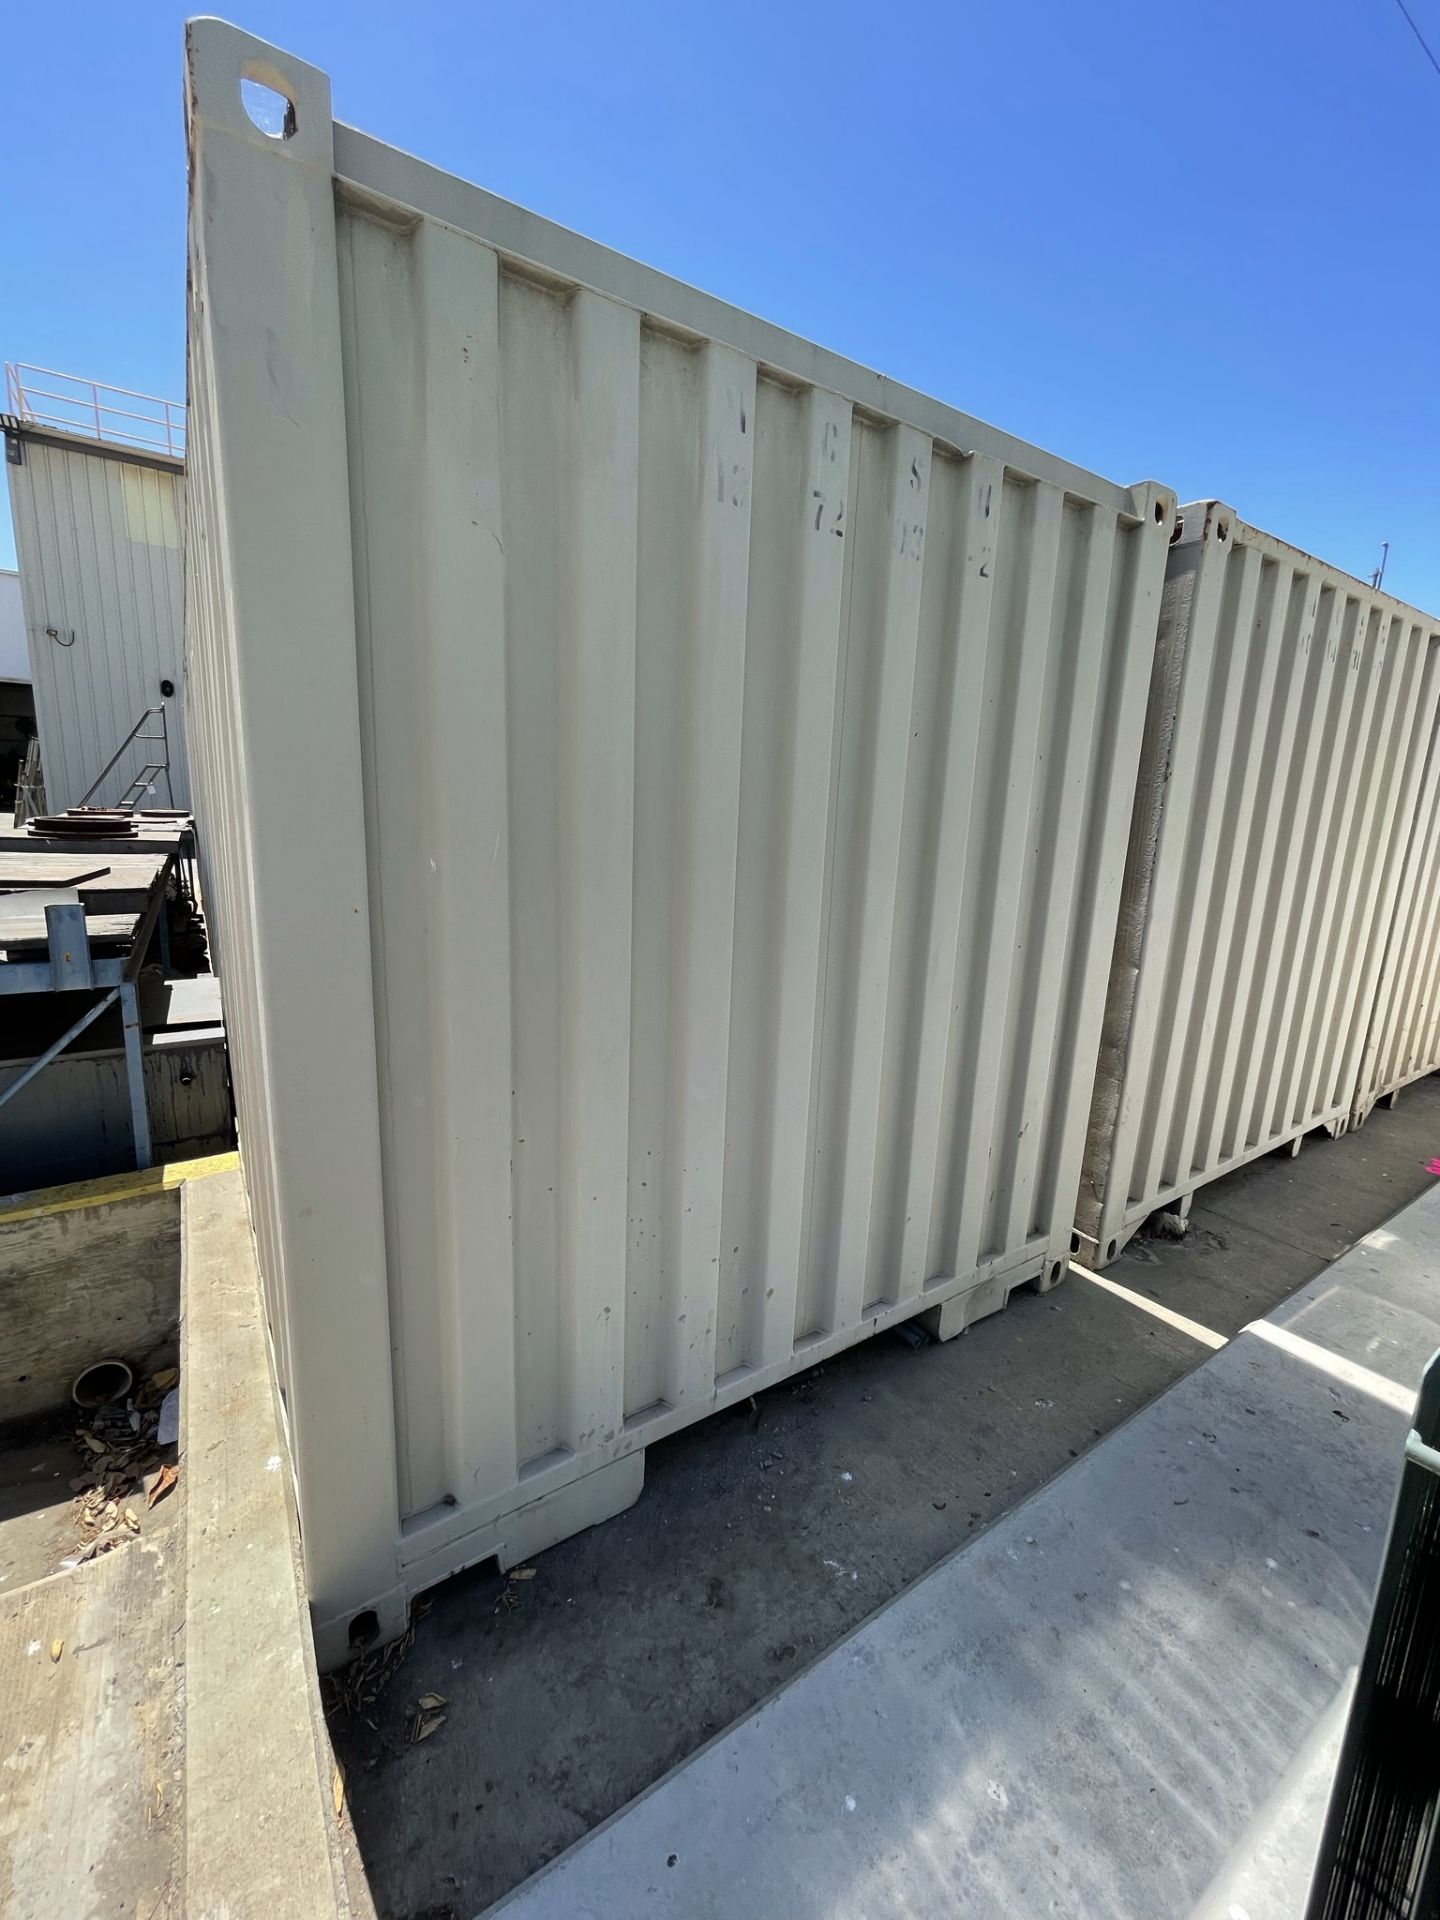 40’ STORAGE CONTAINERS, (2) TURBINE ROOF AIR VENTS, GREAT CONDITION - Image 3 of 3